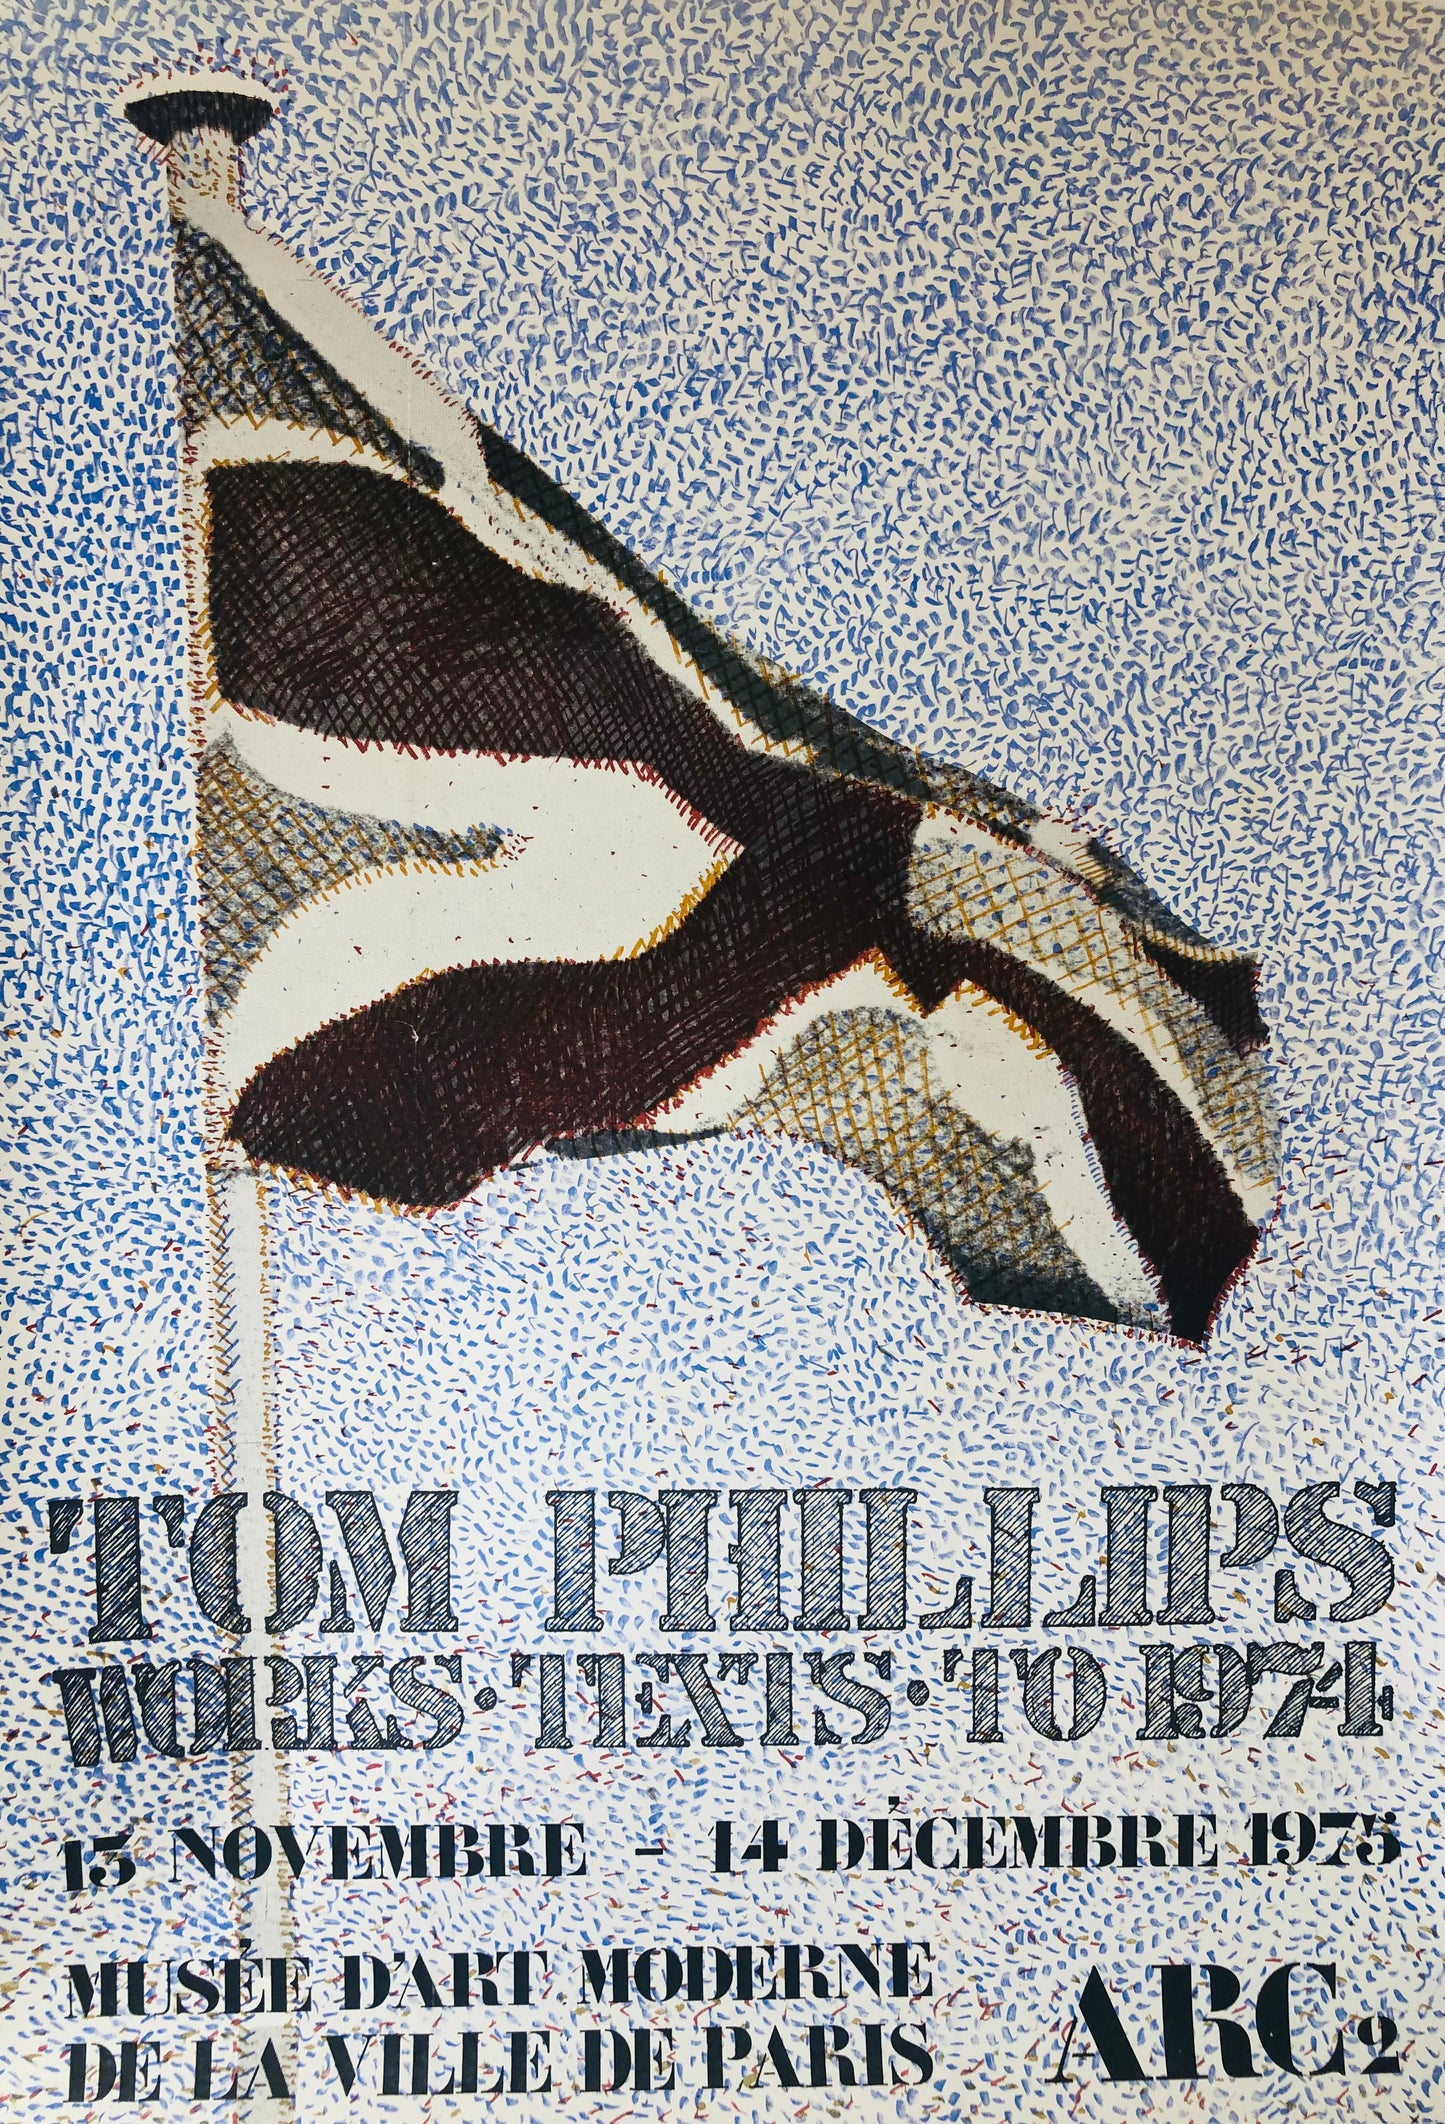 Tom Phillips 1975 Exhibition Poster